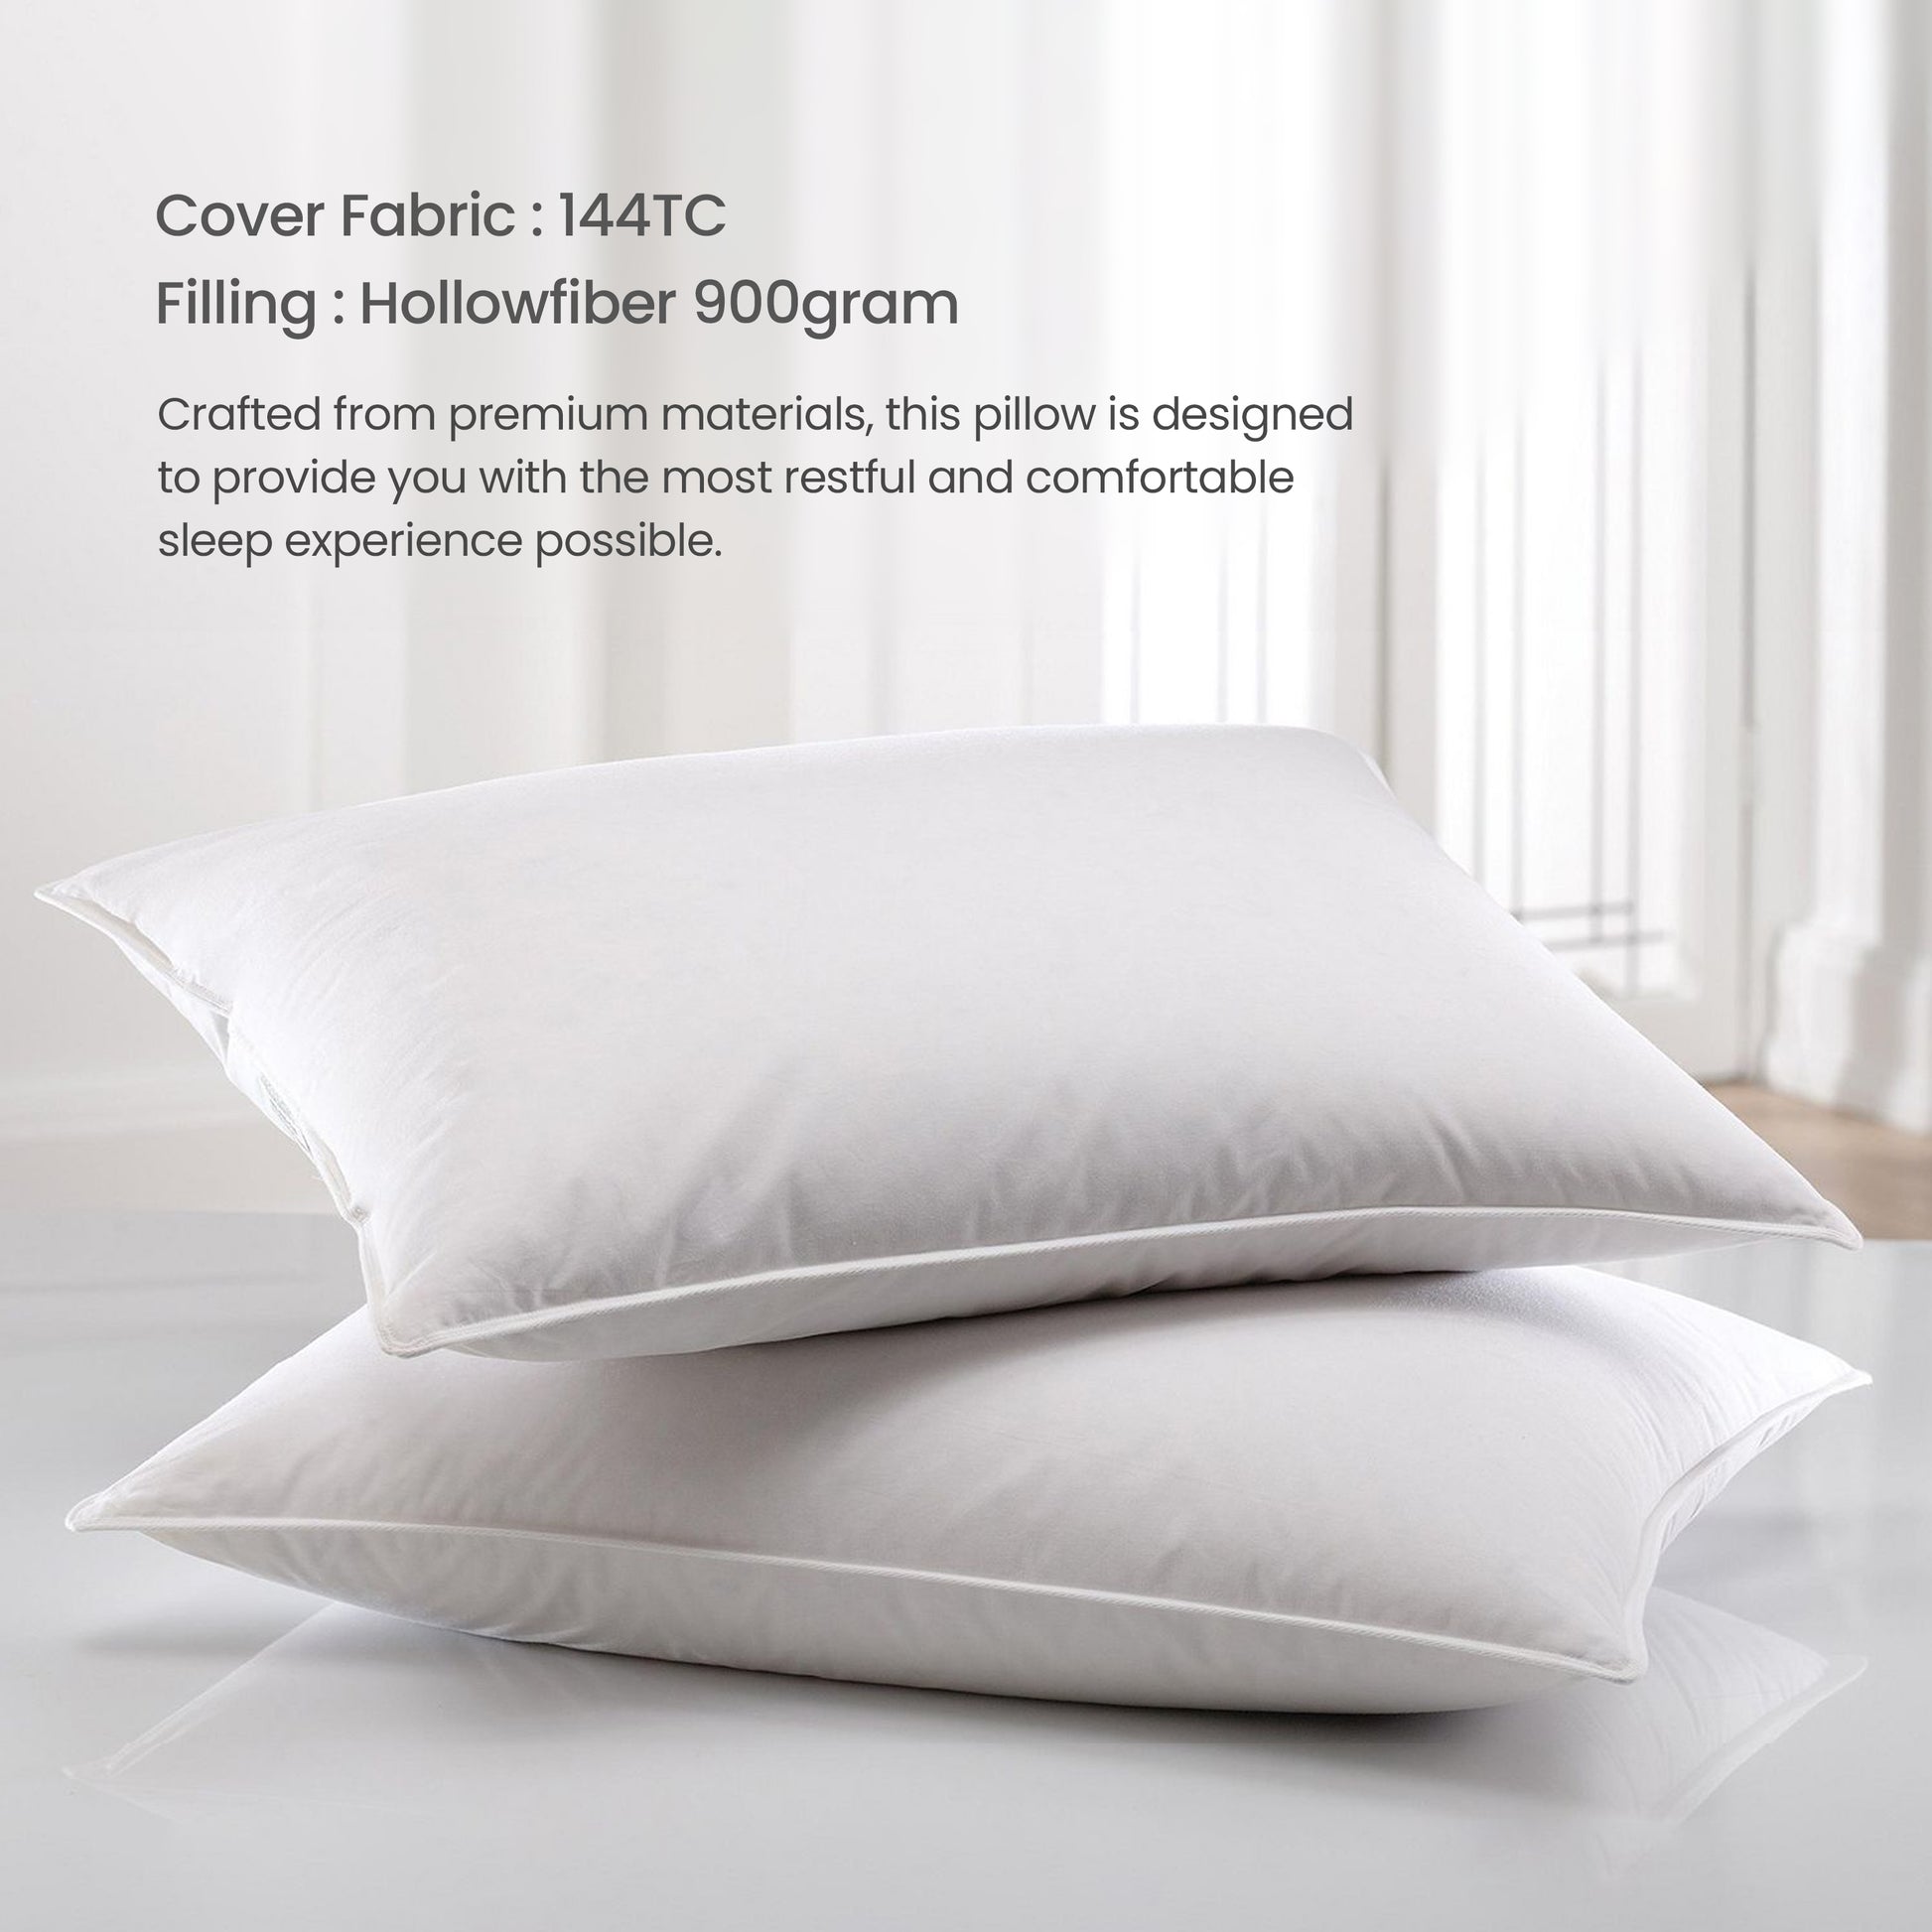 Exquisite Sleep Pillow Standard Size 50x75cm with Self Cord for Ultimate Support Ergonomically designed for Side Sleepers 900g